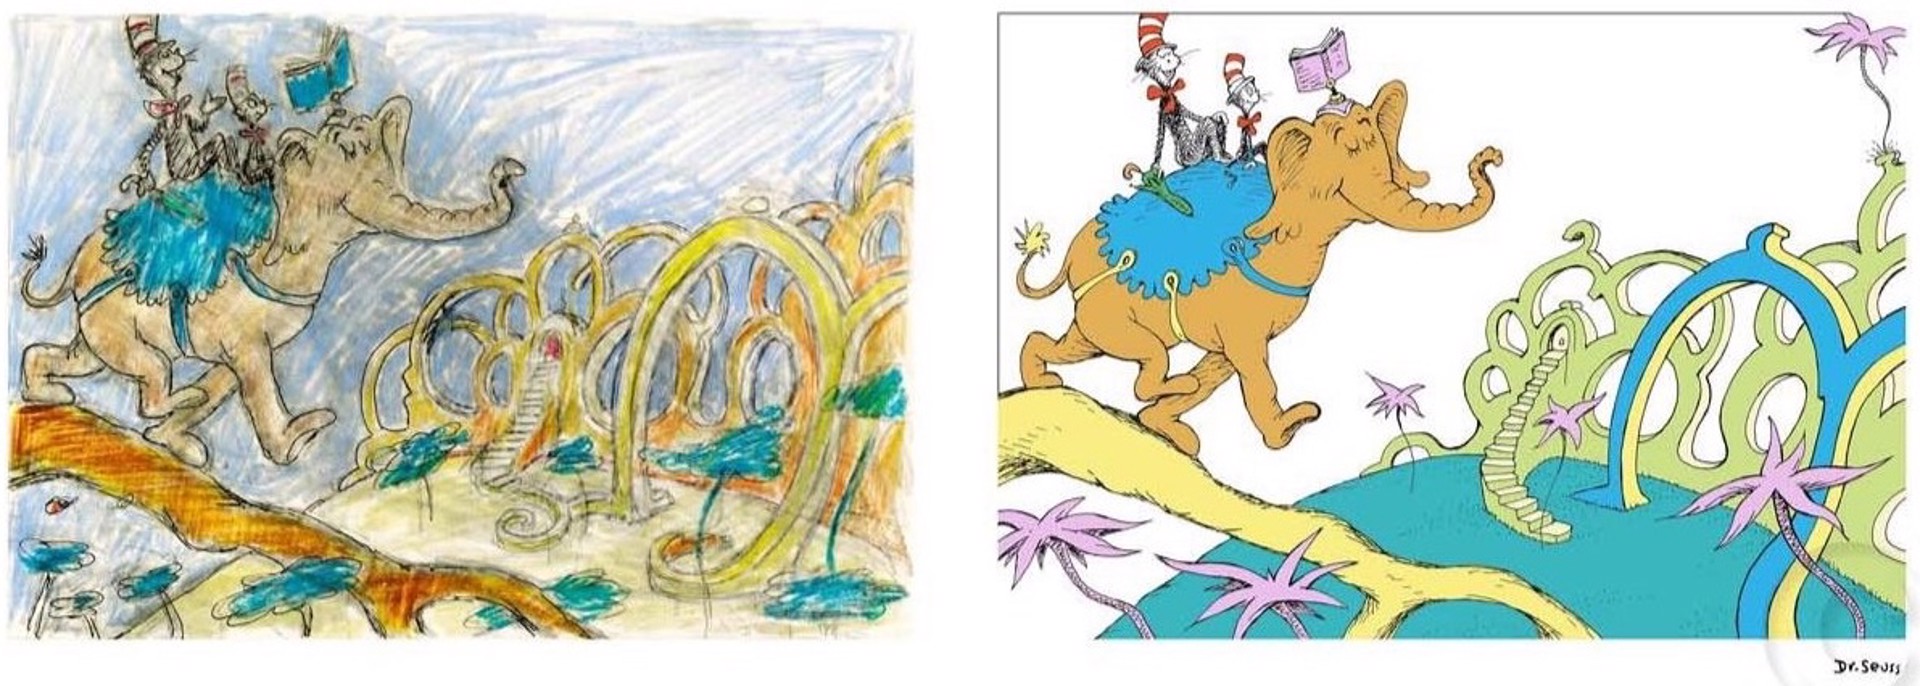 The More That You Read, The More Places You'll Know - Diptych by Dr. Seuss